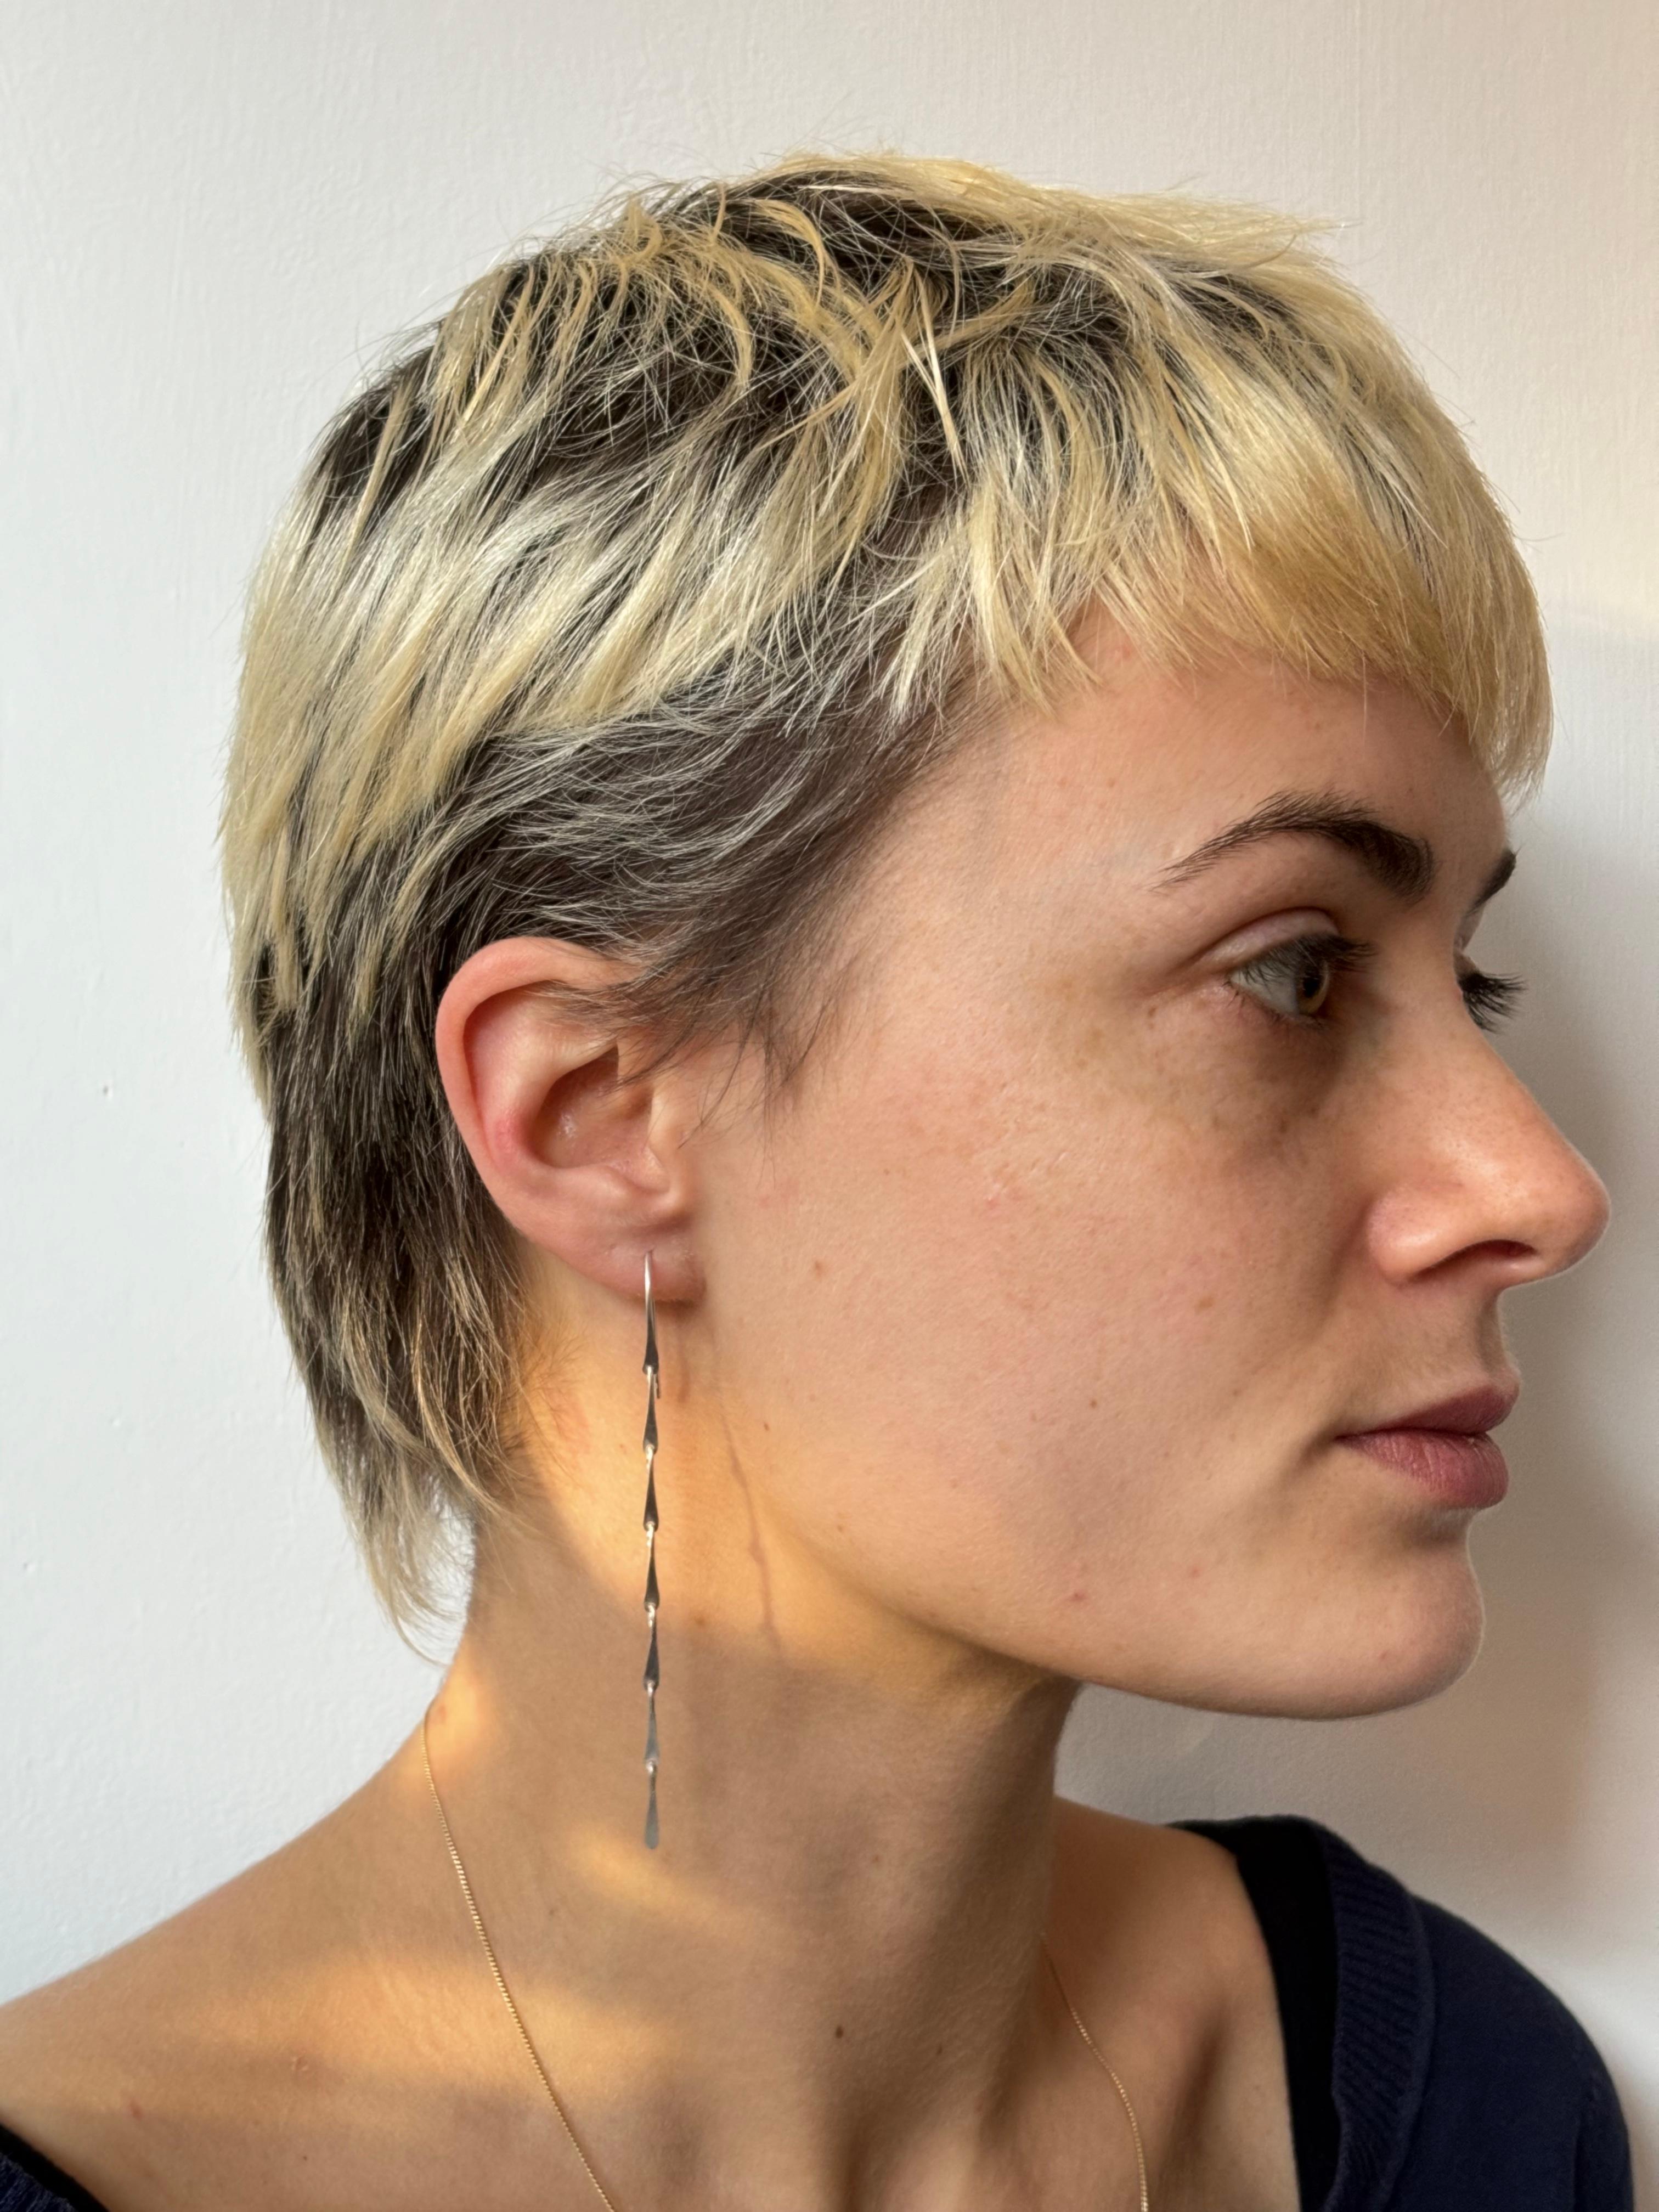 These lightweight earrings are a perfect everyday statement. Flowy delicate hook earrings, inspired by the articulated legs of insects. 

They are fabricated from sterling silver forged links, and are finished with a matte sheen to catch the light